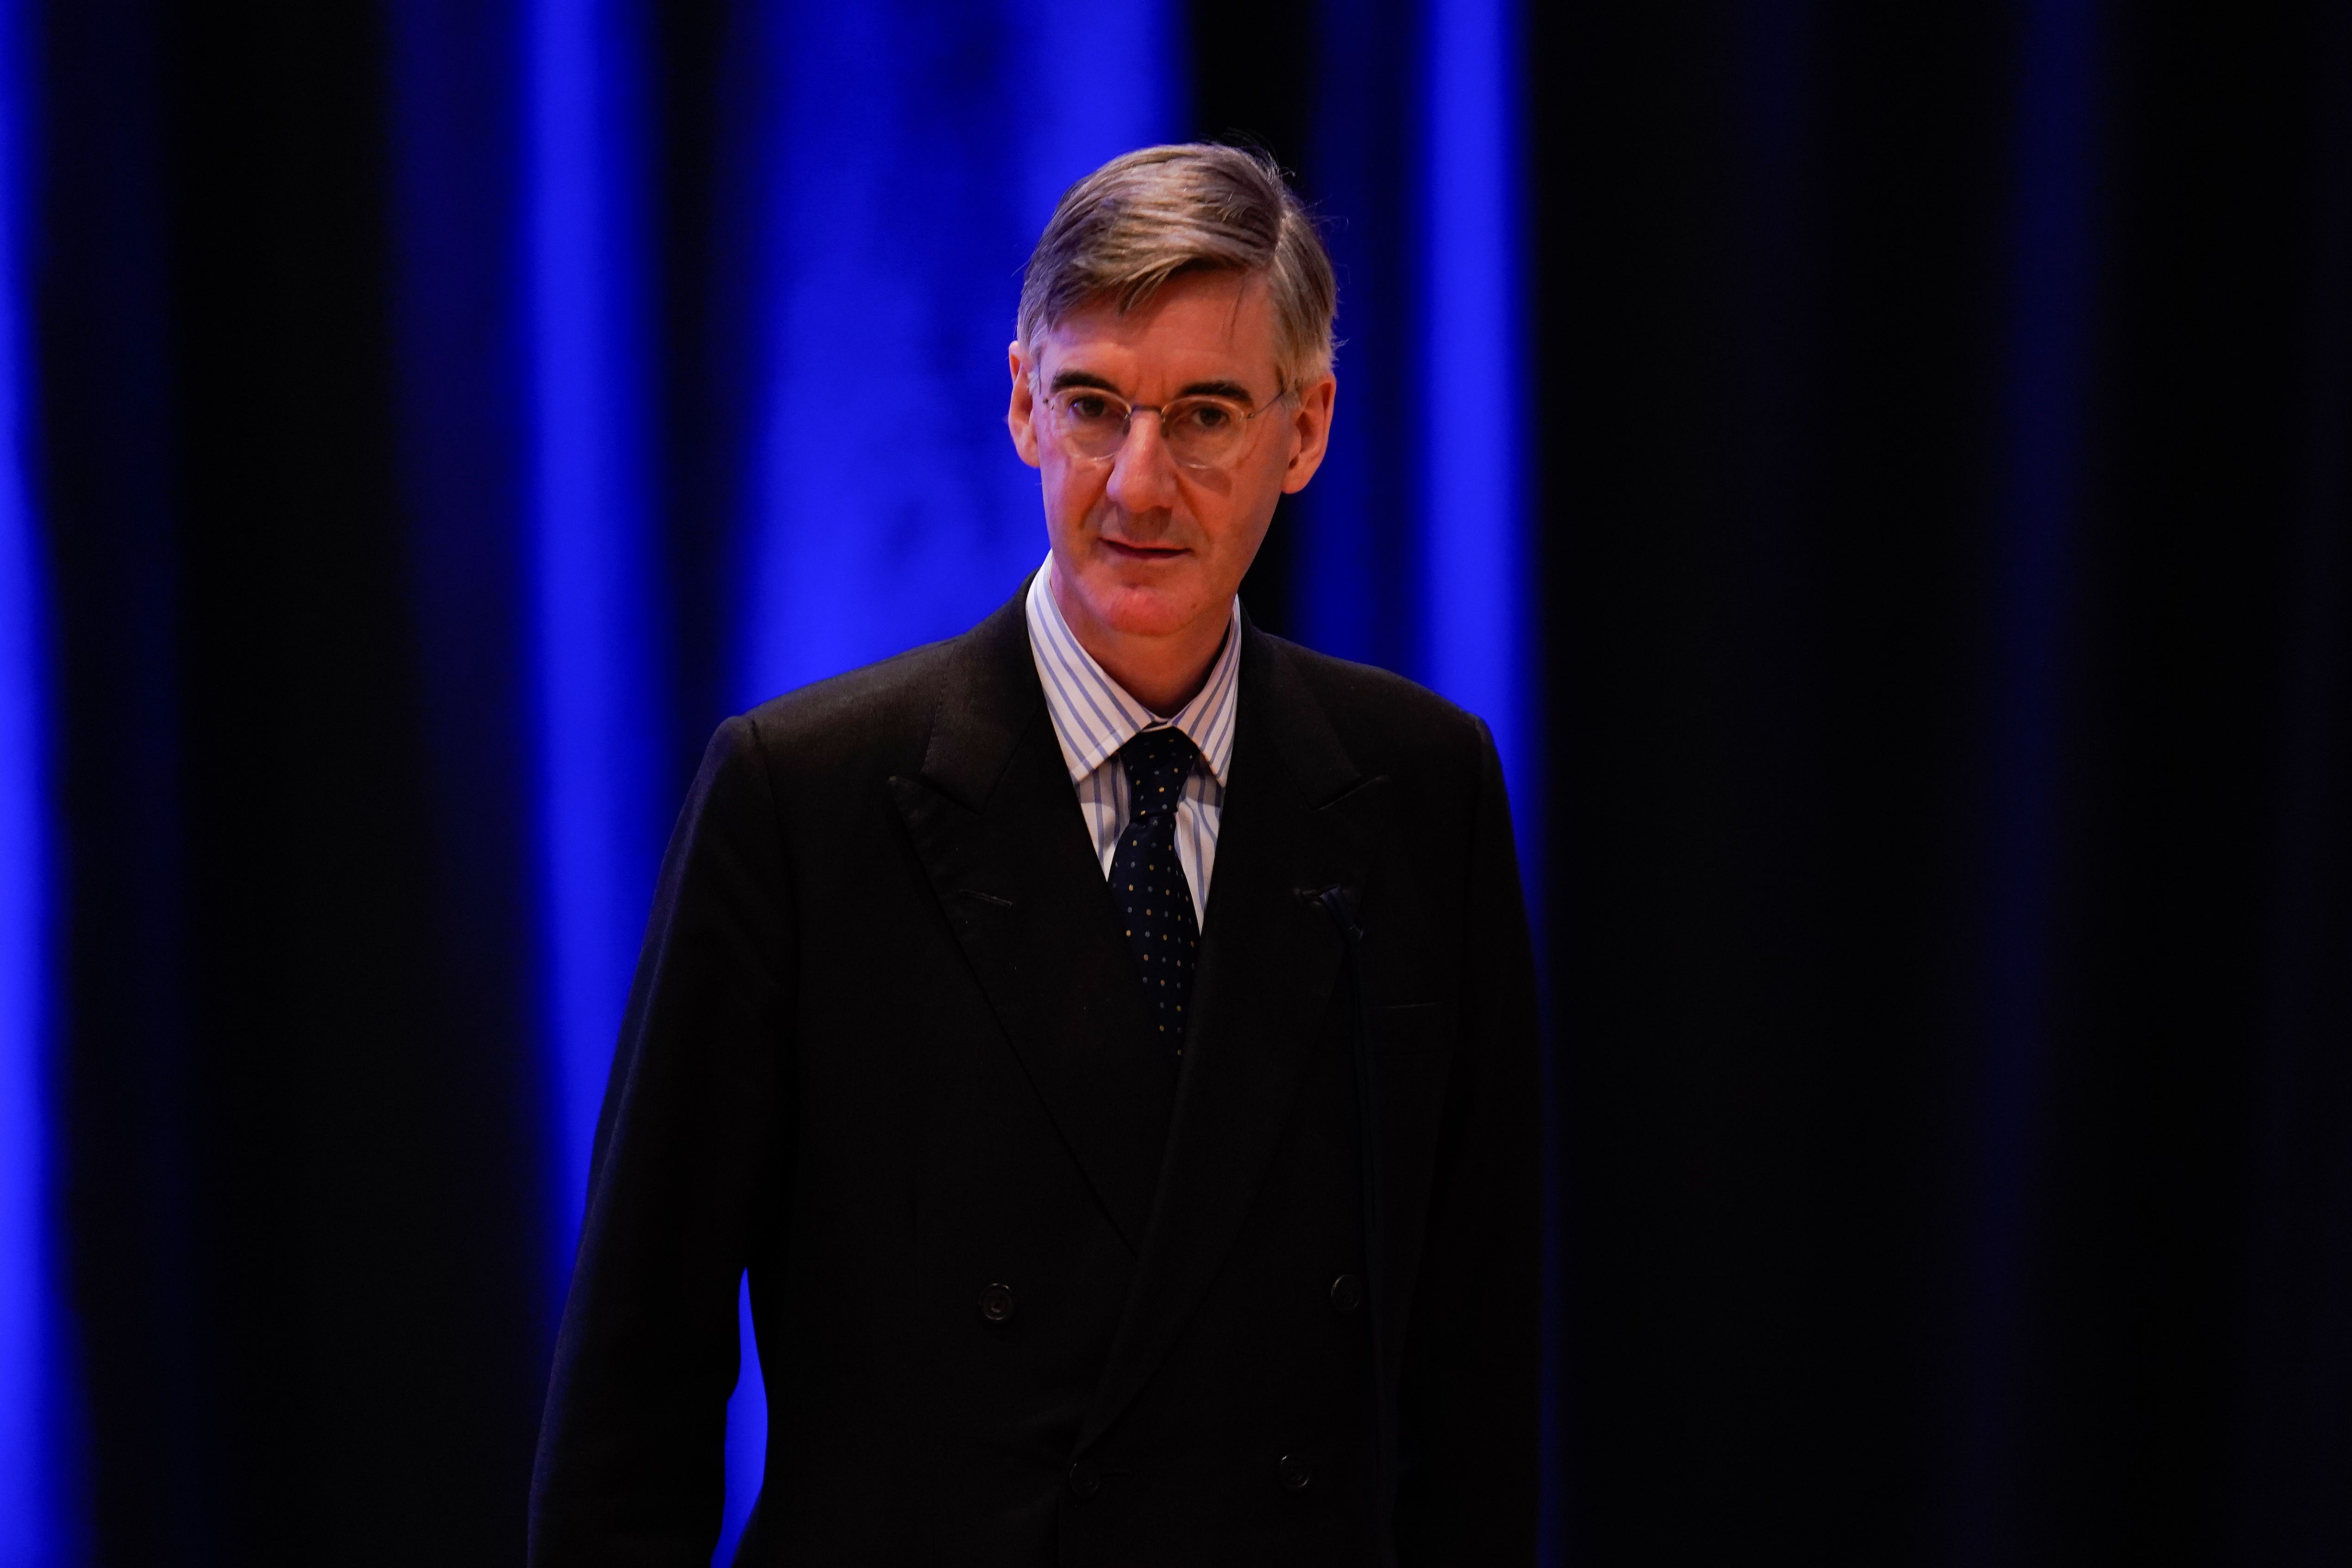 Jacob Rees Mogg spoke at the National Conservatism conference in Westminster on Monday (Andrew Matthews/PA)